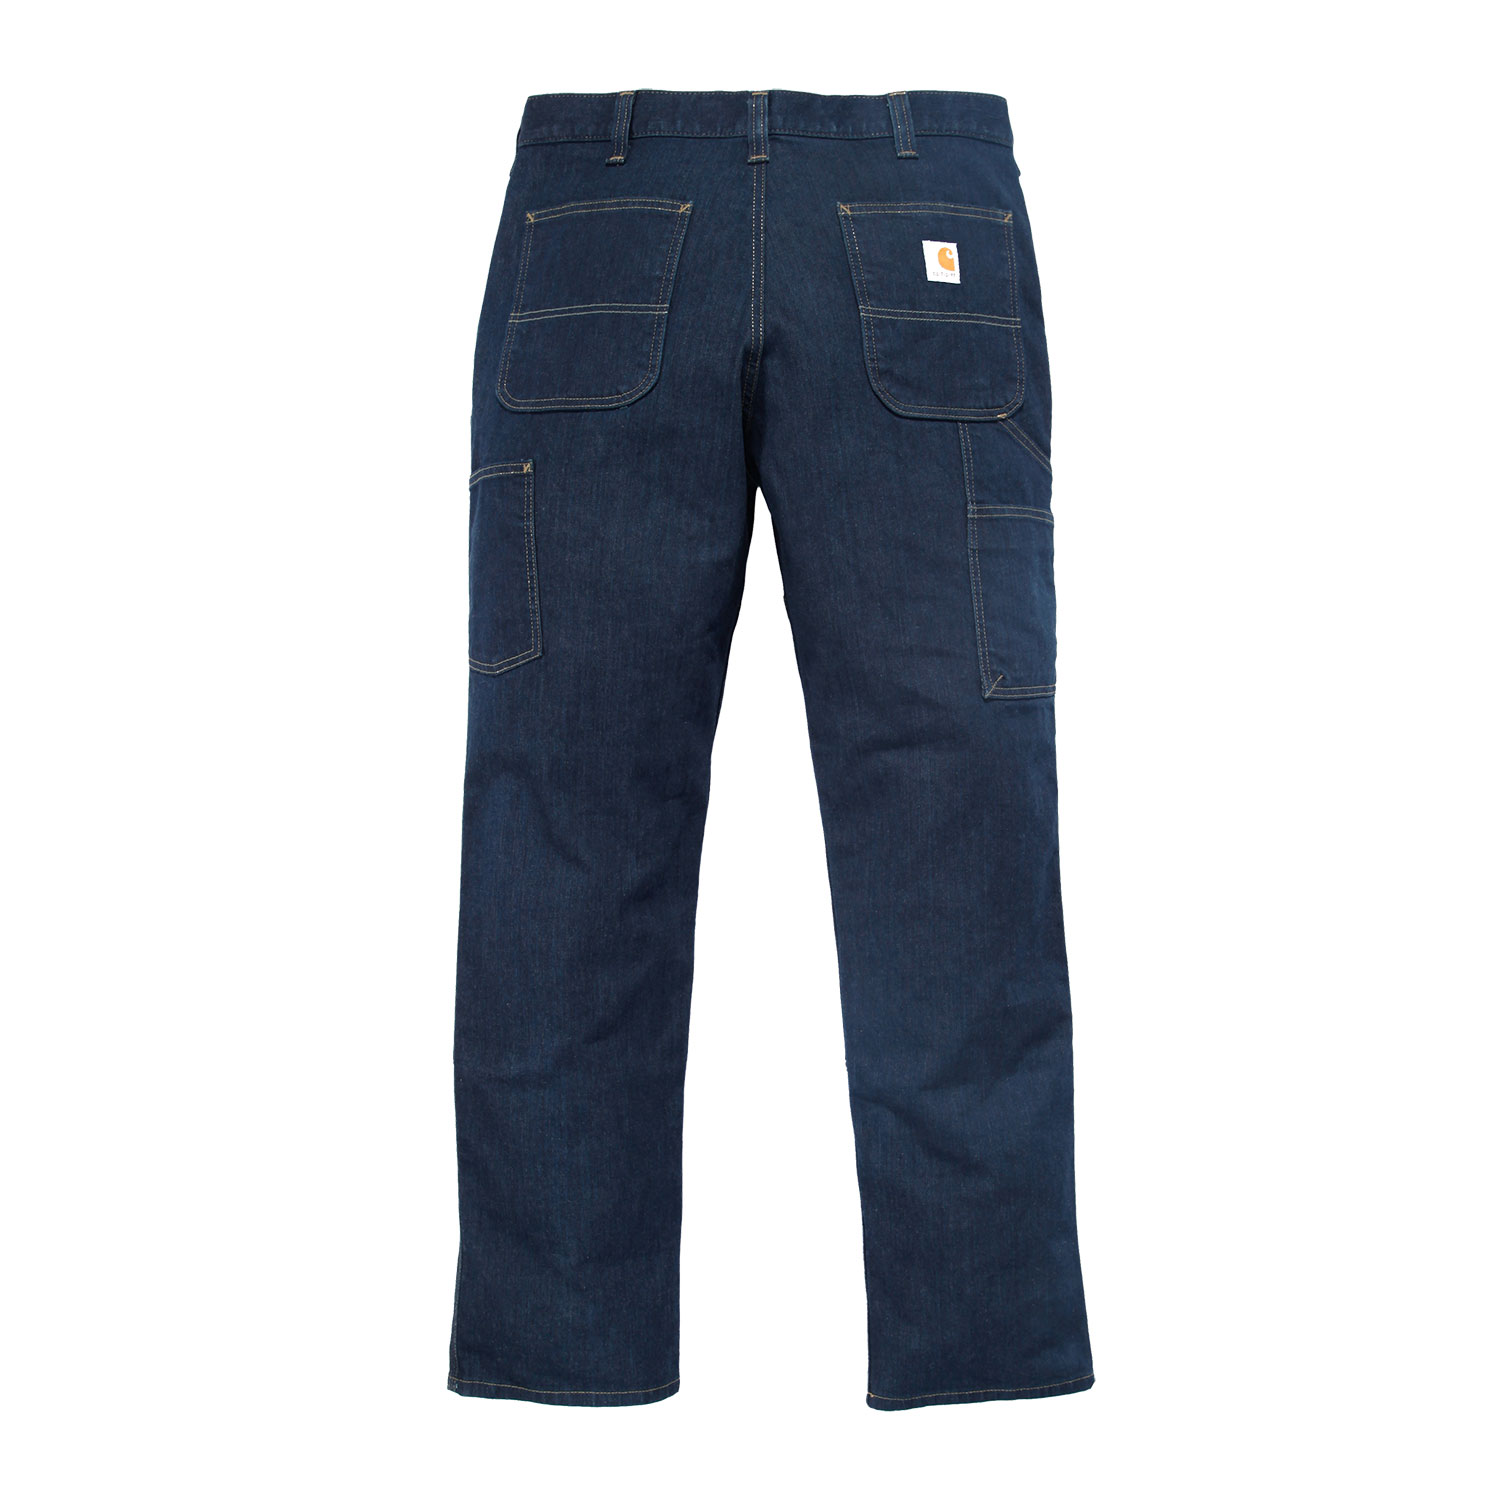 Carhartt Double Front Dungaree Jeans - 2